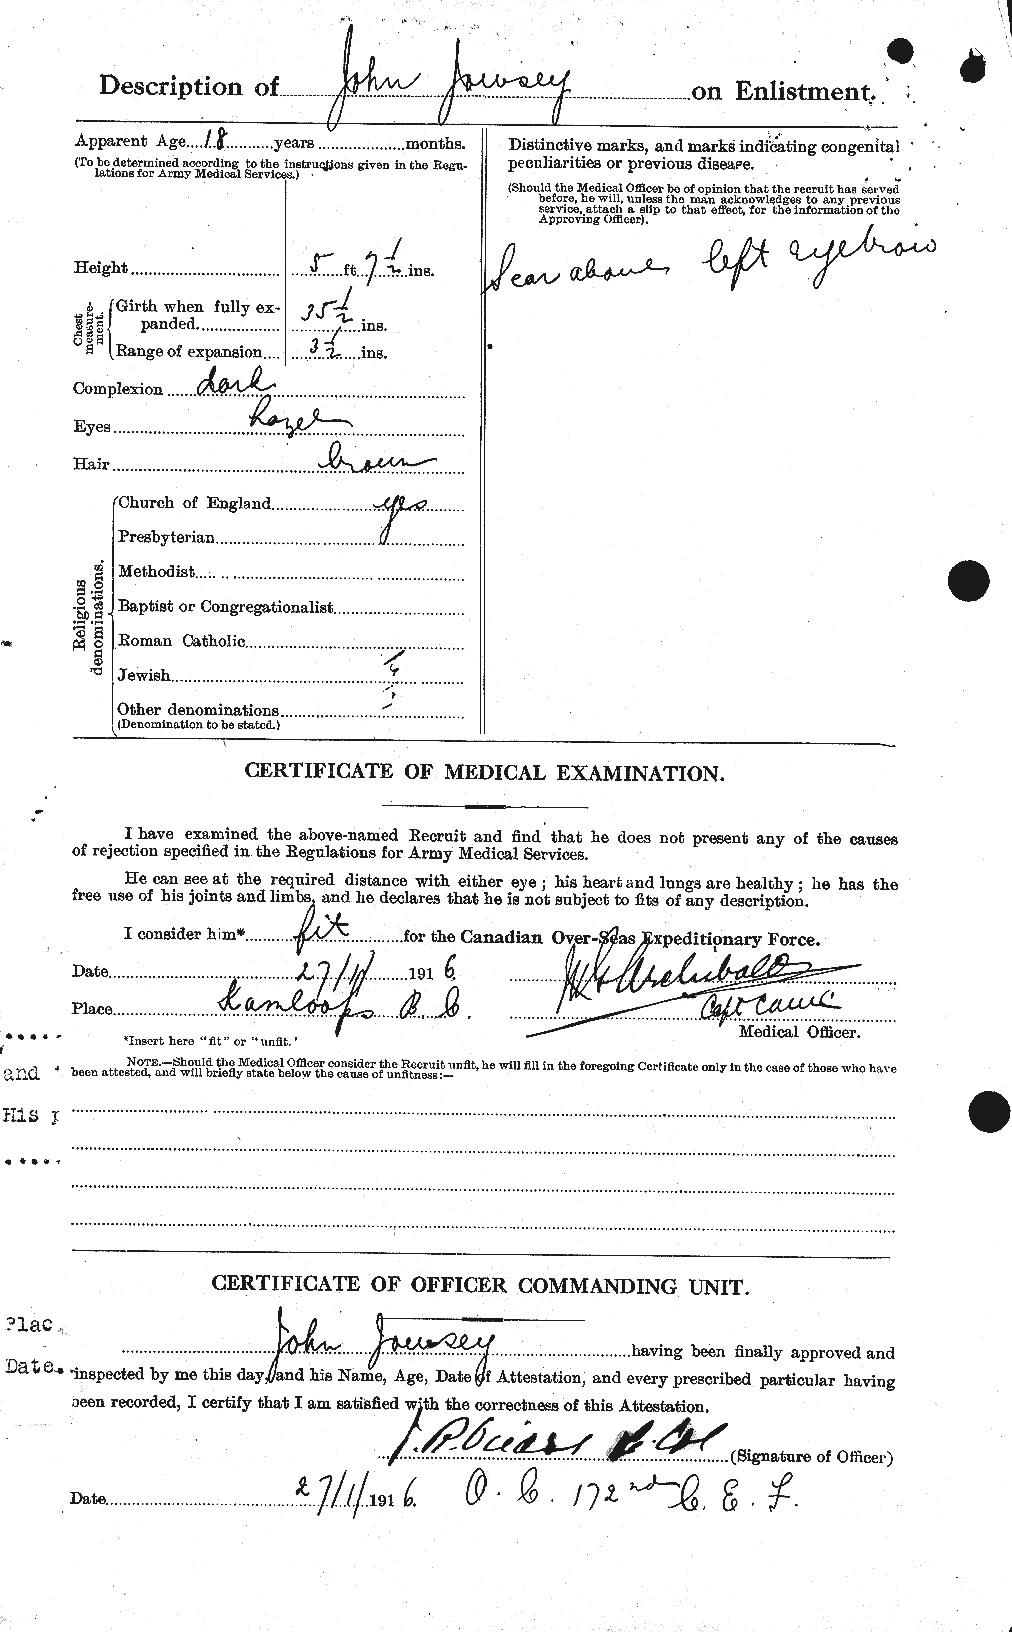 Personnel Records of the First World War - CEF 426348b